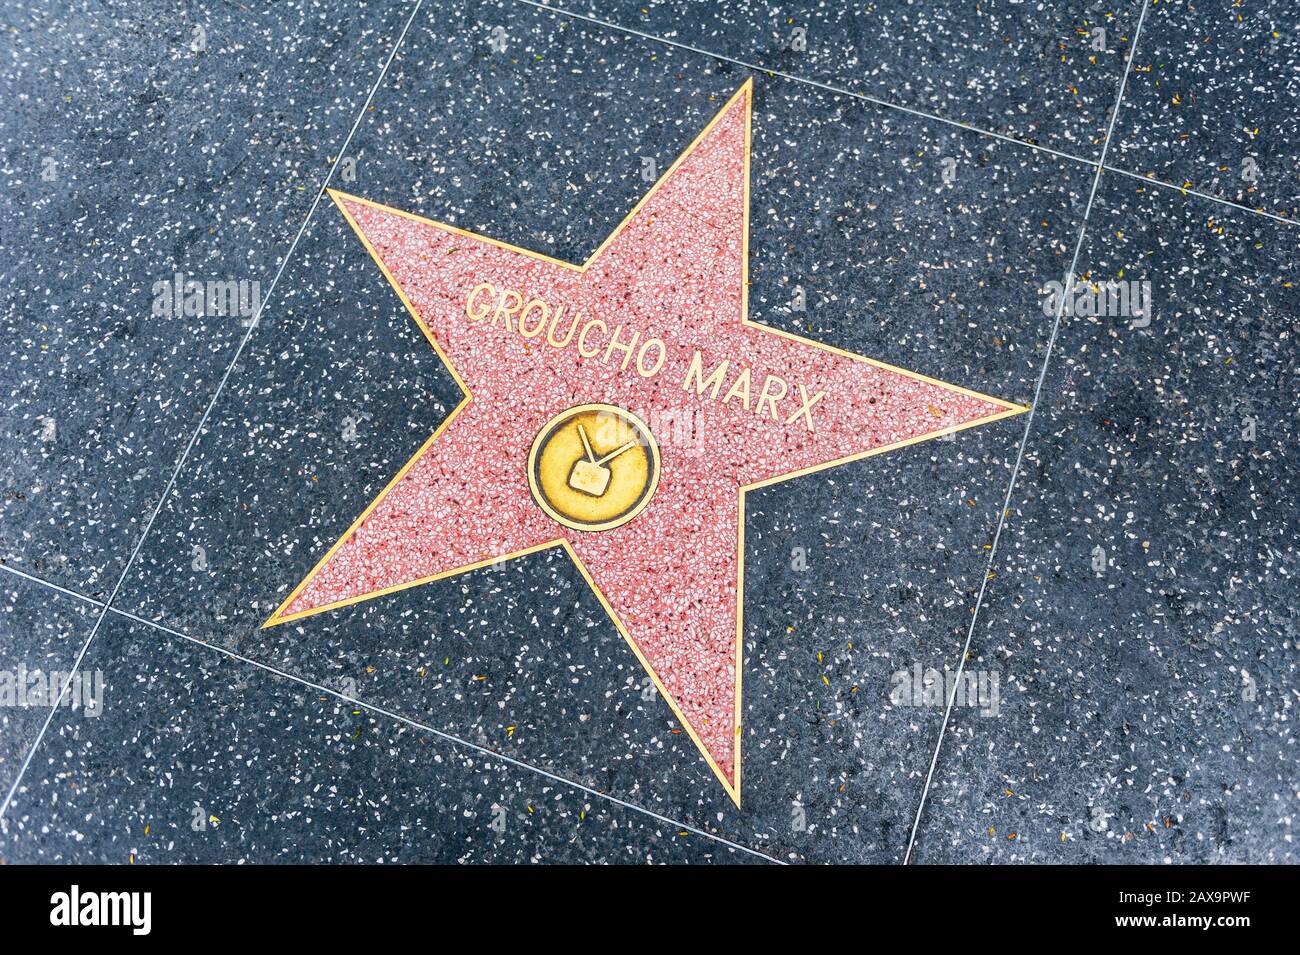 Groucho Marx star on Hollywood Walk of Fame in Hollywood, California, USA. He.was an American actor and comedian, active from 1905-1976. Stock Photo